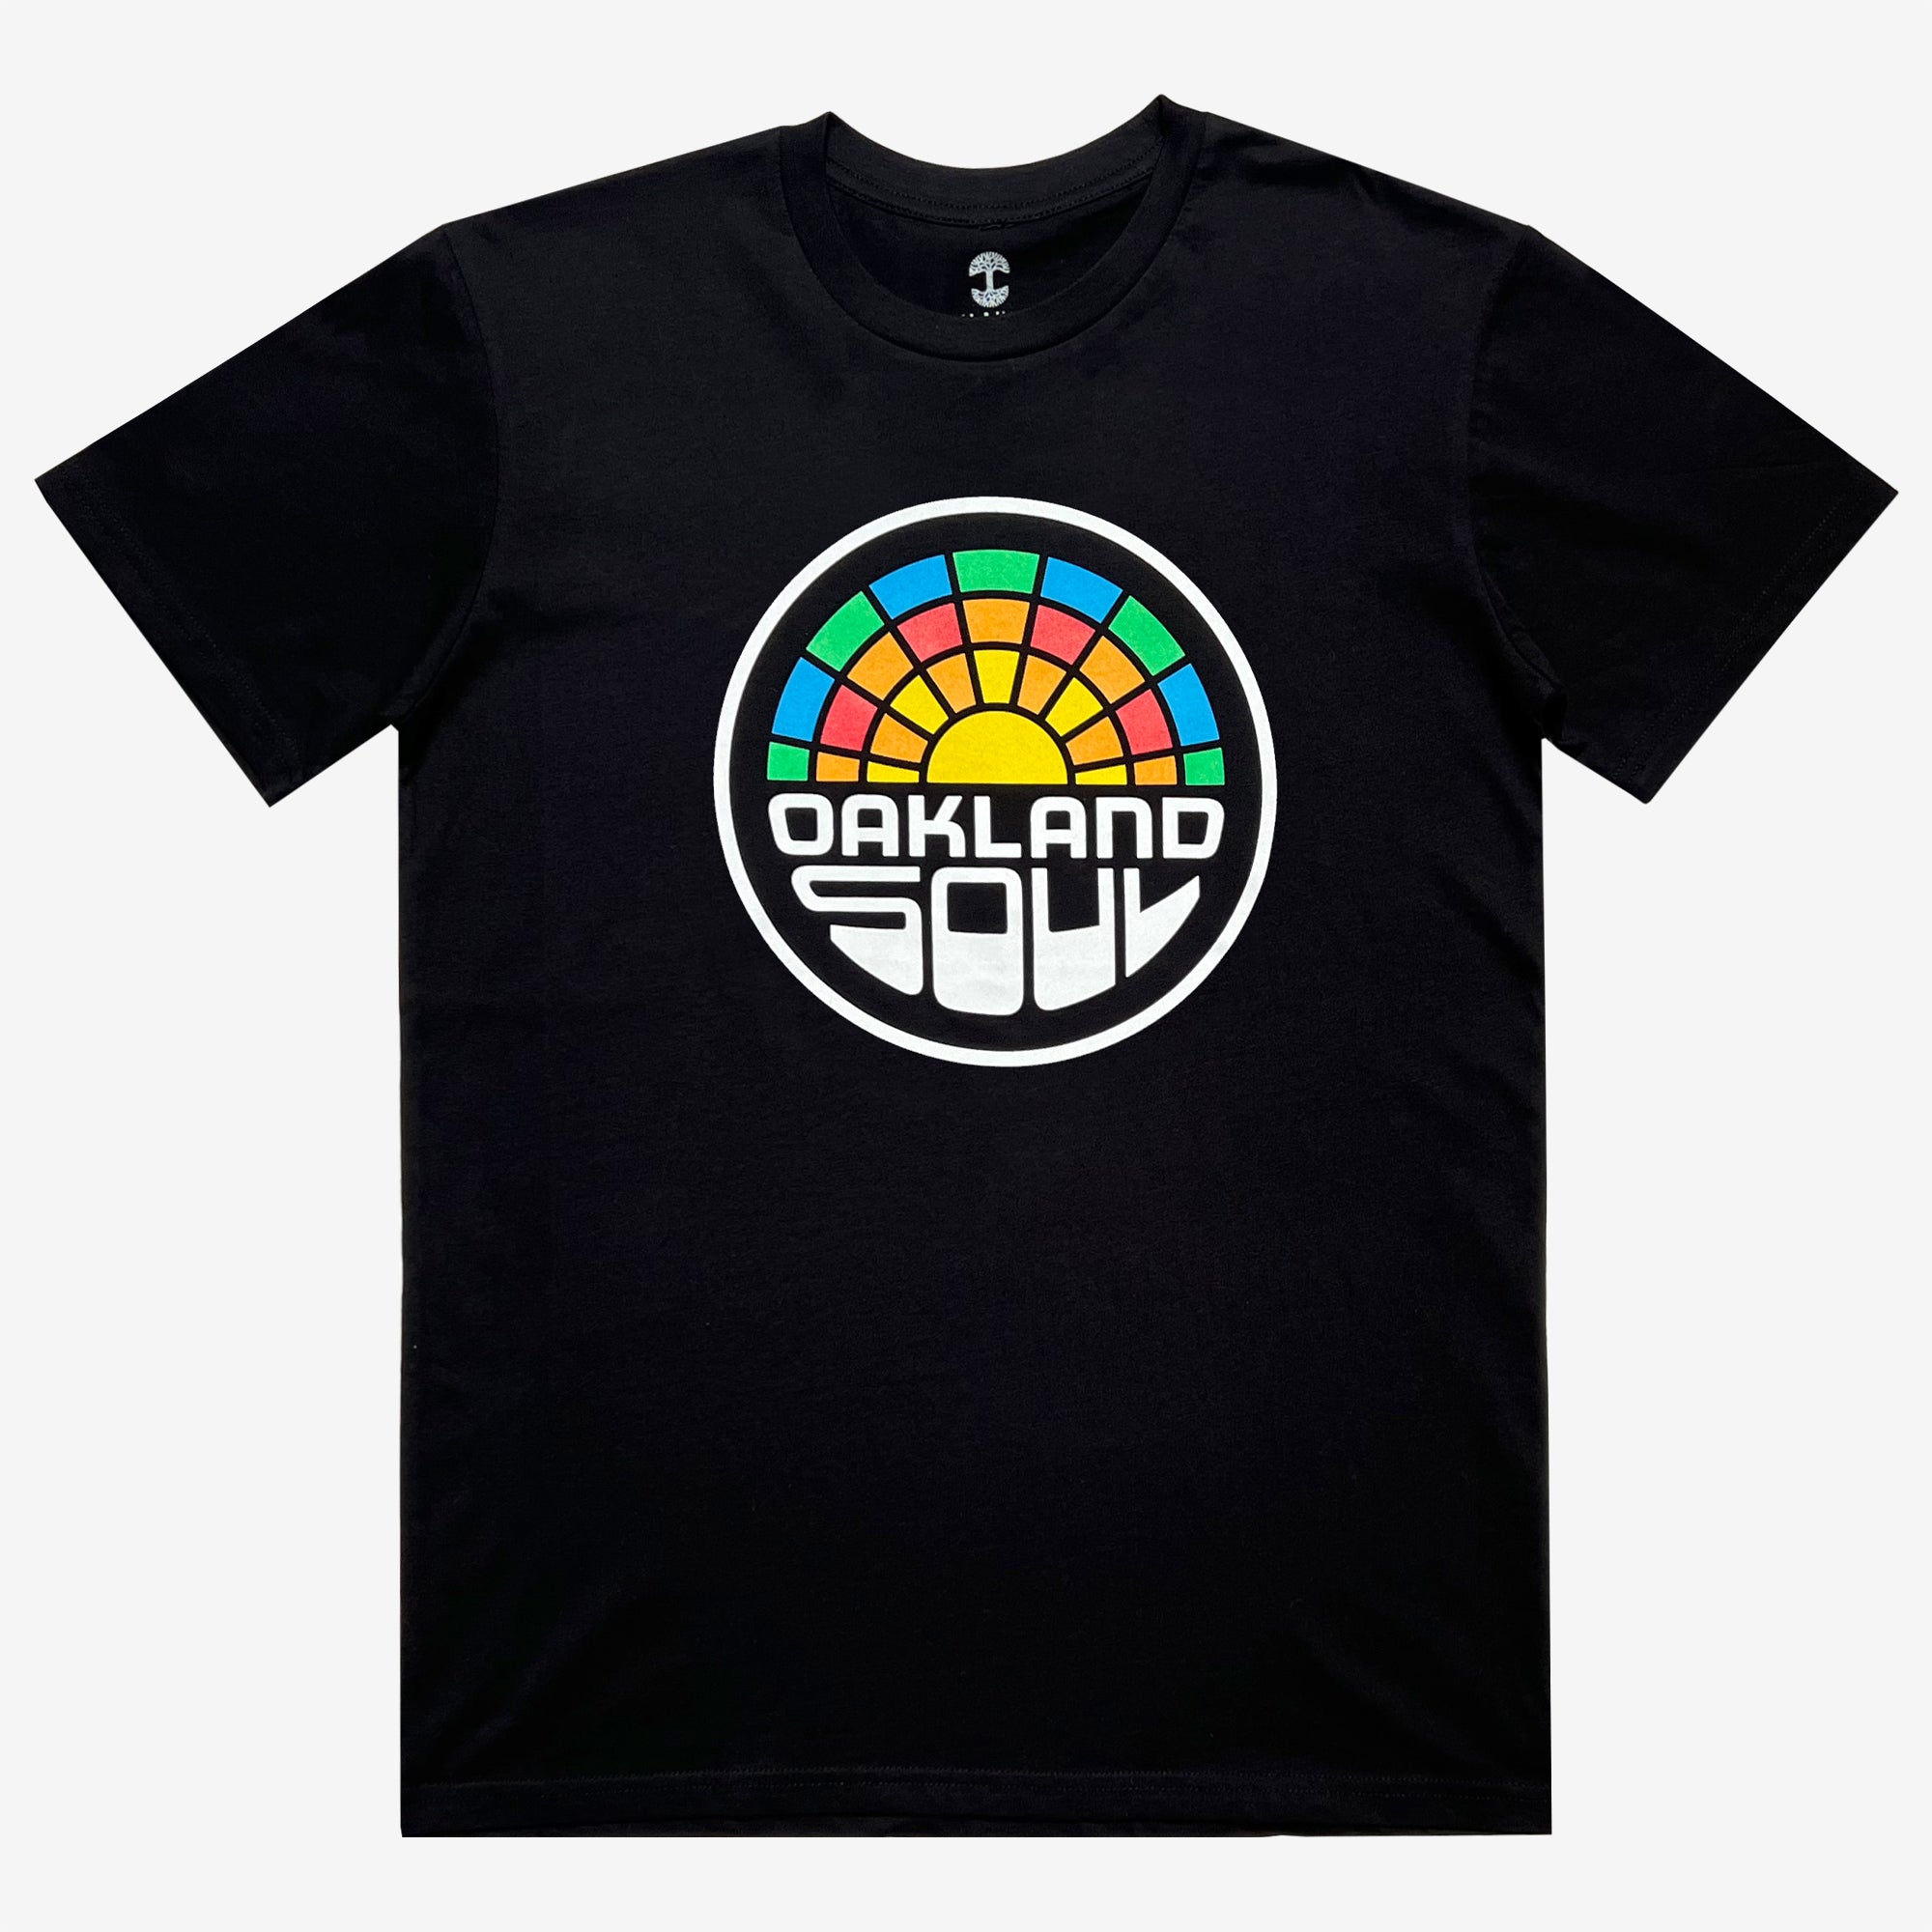 Black t-shirt with a graphic of a full color Oakland Soul logo on the chest.